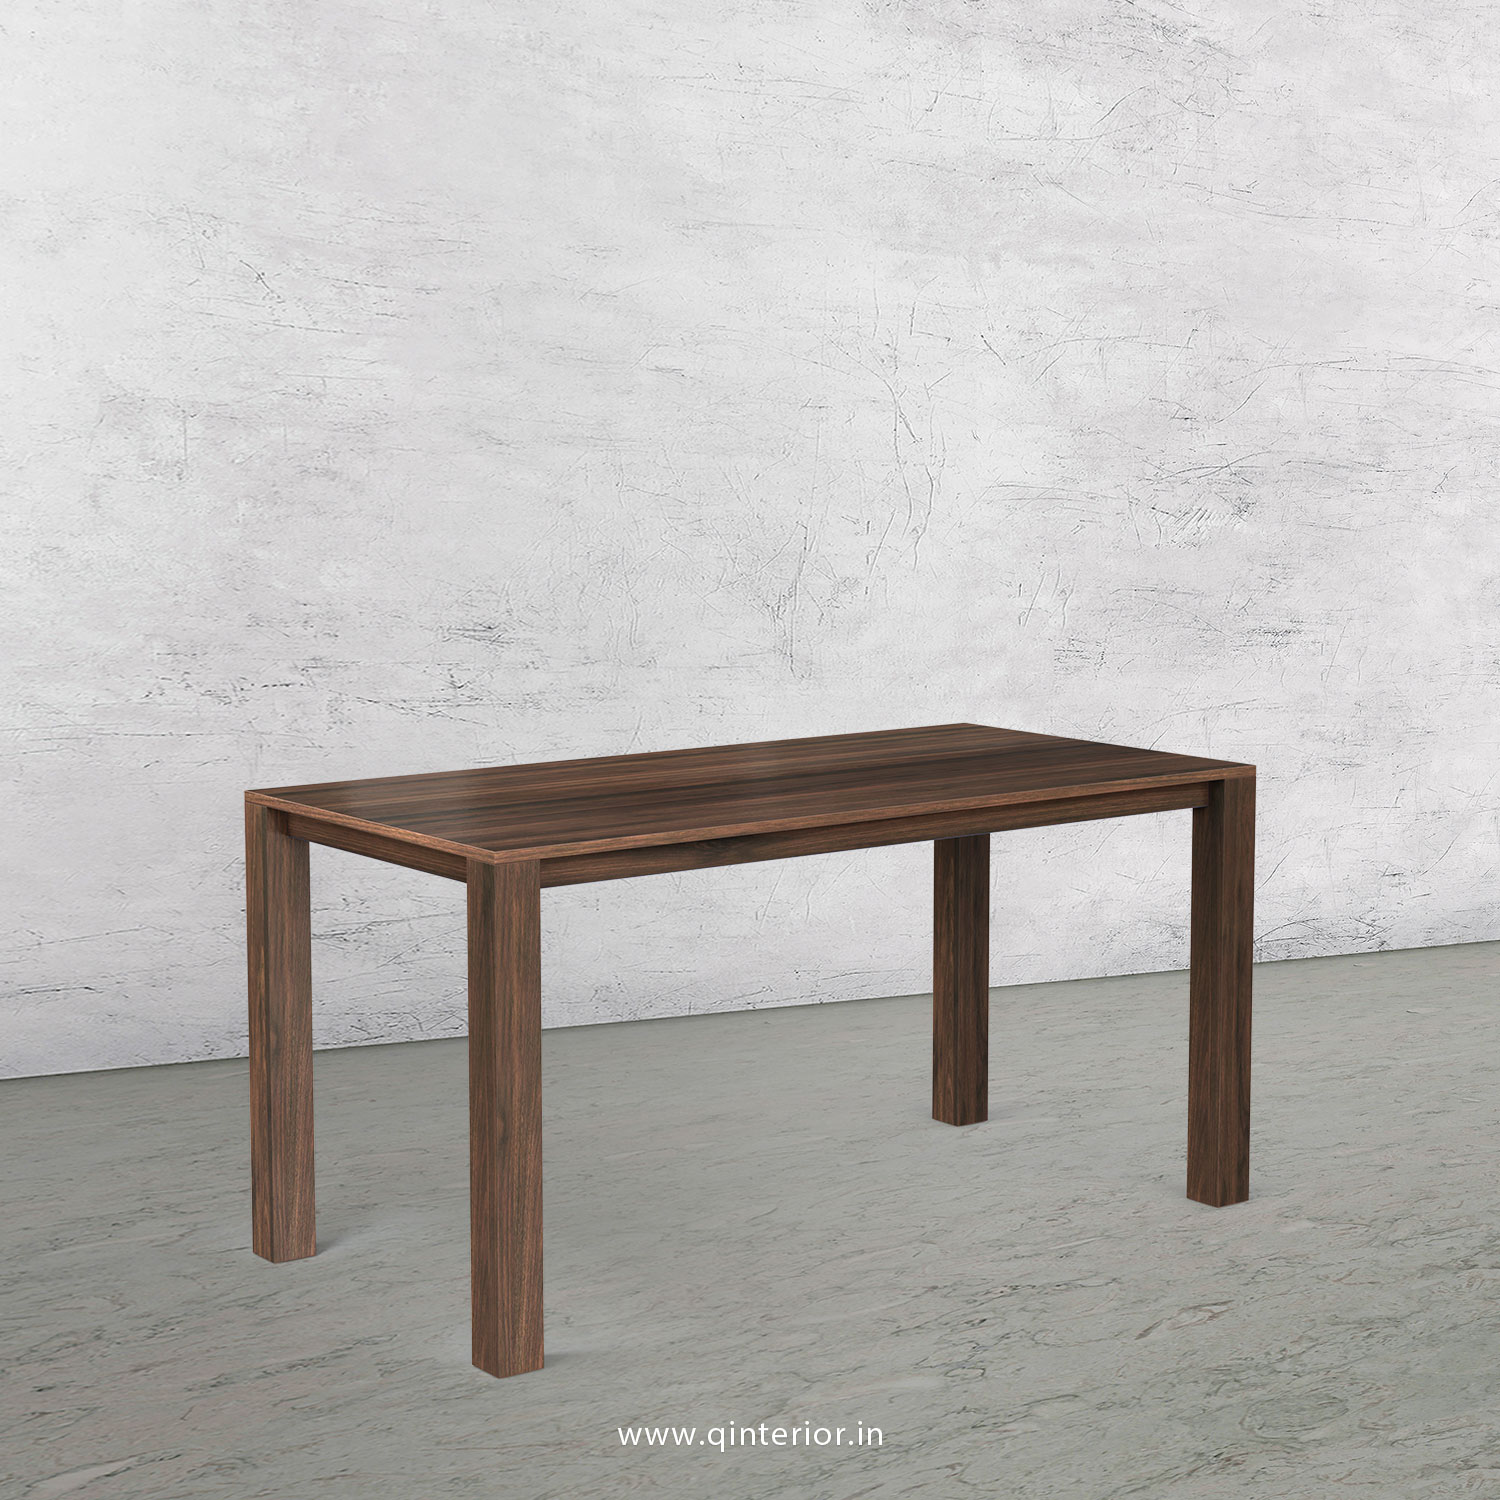 Windsor Dining Table in Walnut Finish - DTB001 C1